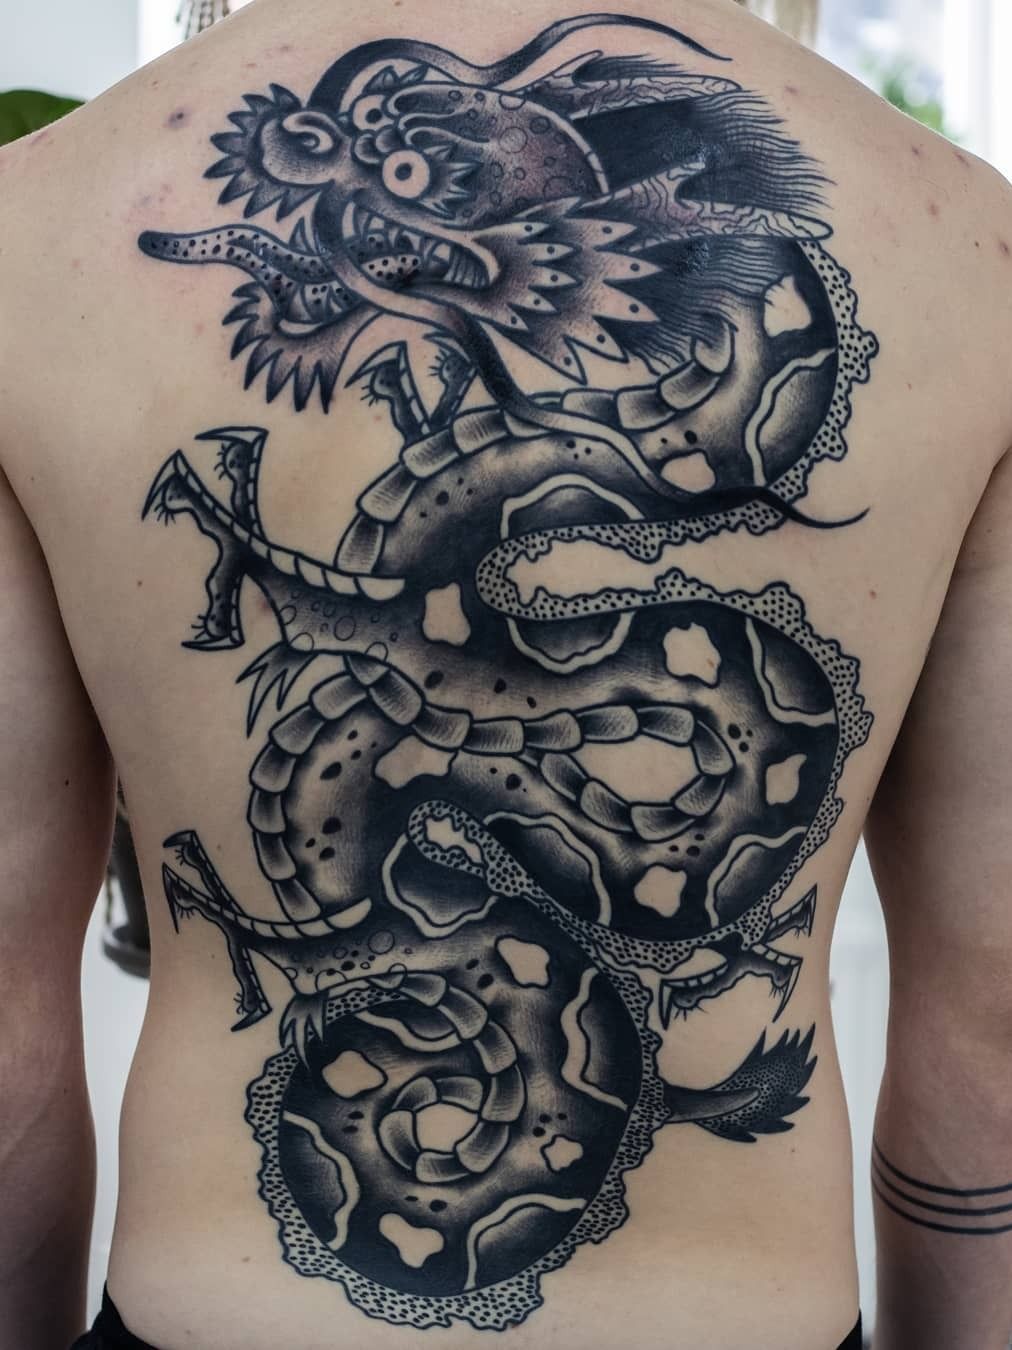 Olde Line Tattoo Gallery  Super rad American Traditional Japanese dragon  done by treymanntattooer here oldelinetattoo americantraditionaltattoo  oldelinetattoo pma hagerstownmd valleymall  Facebook